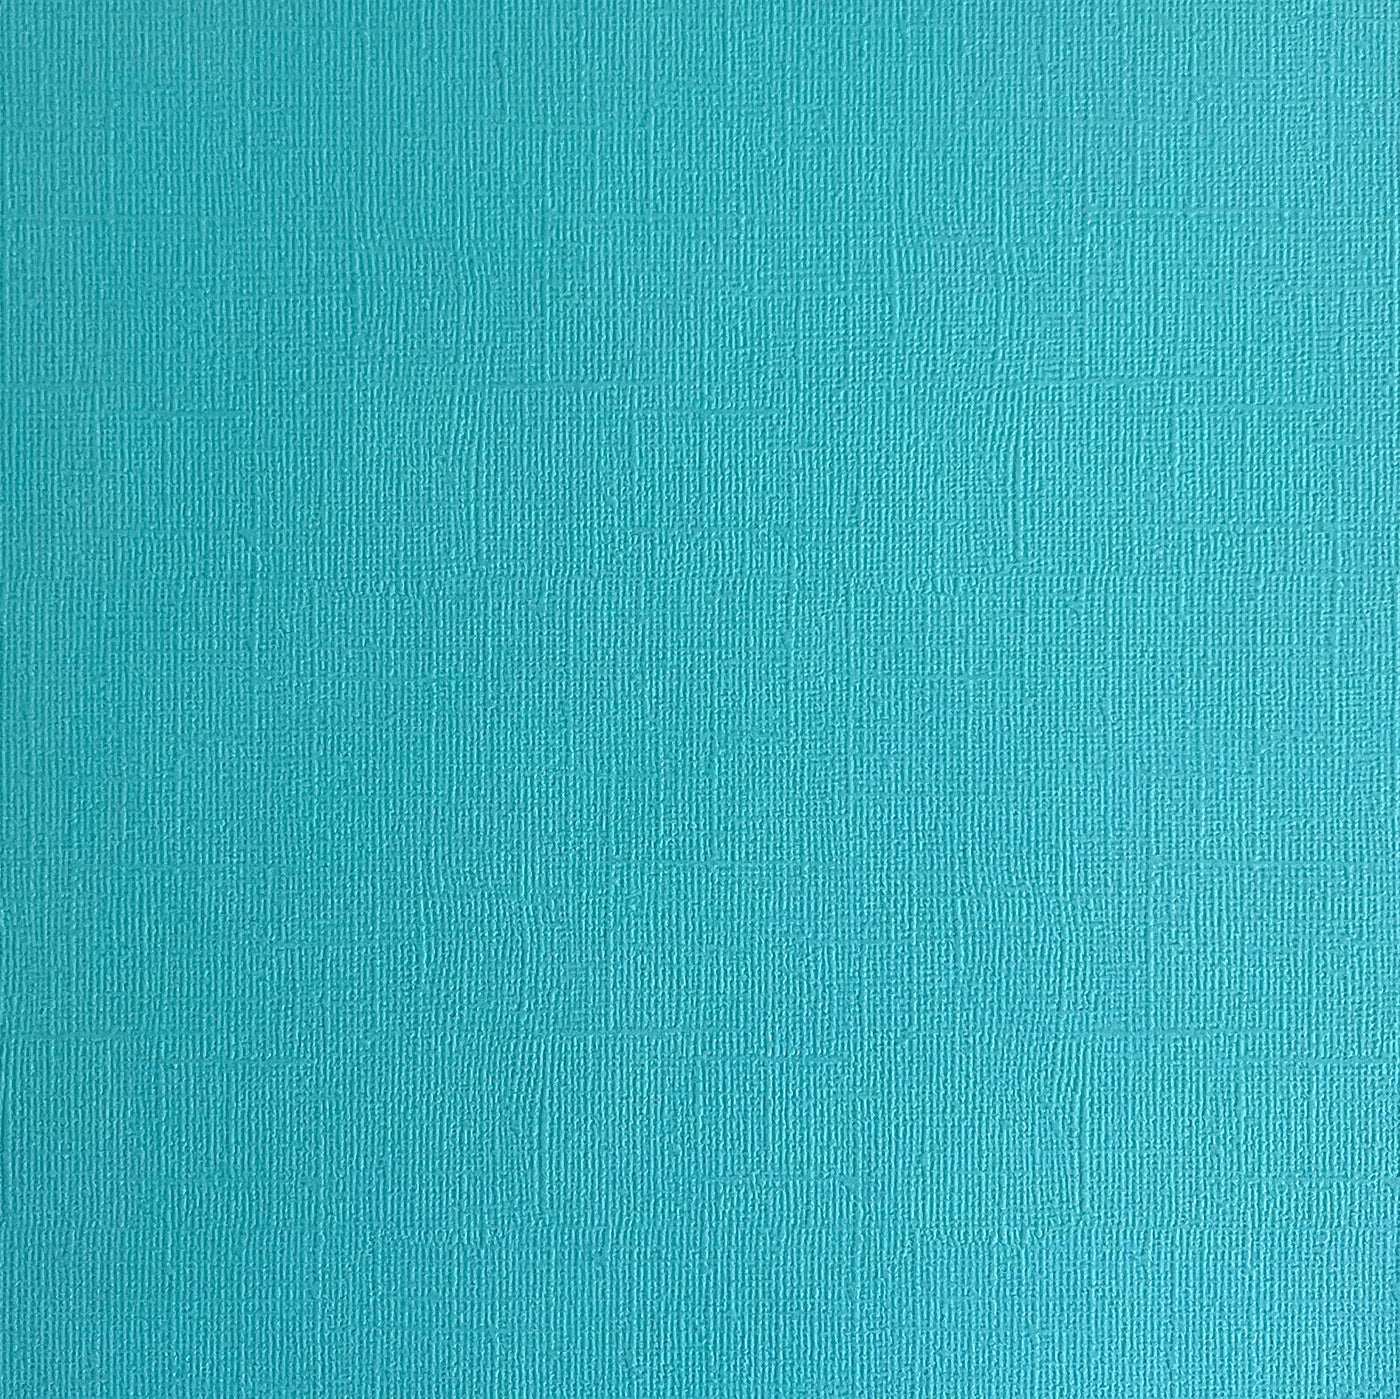 SWIMMING POOL - Bright Blue Textured 12x12 Cardstock - Encore Paper